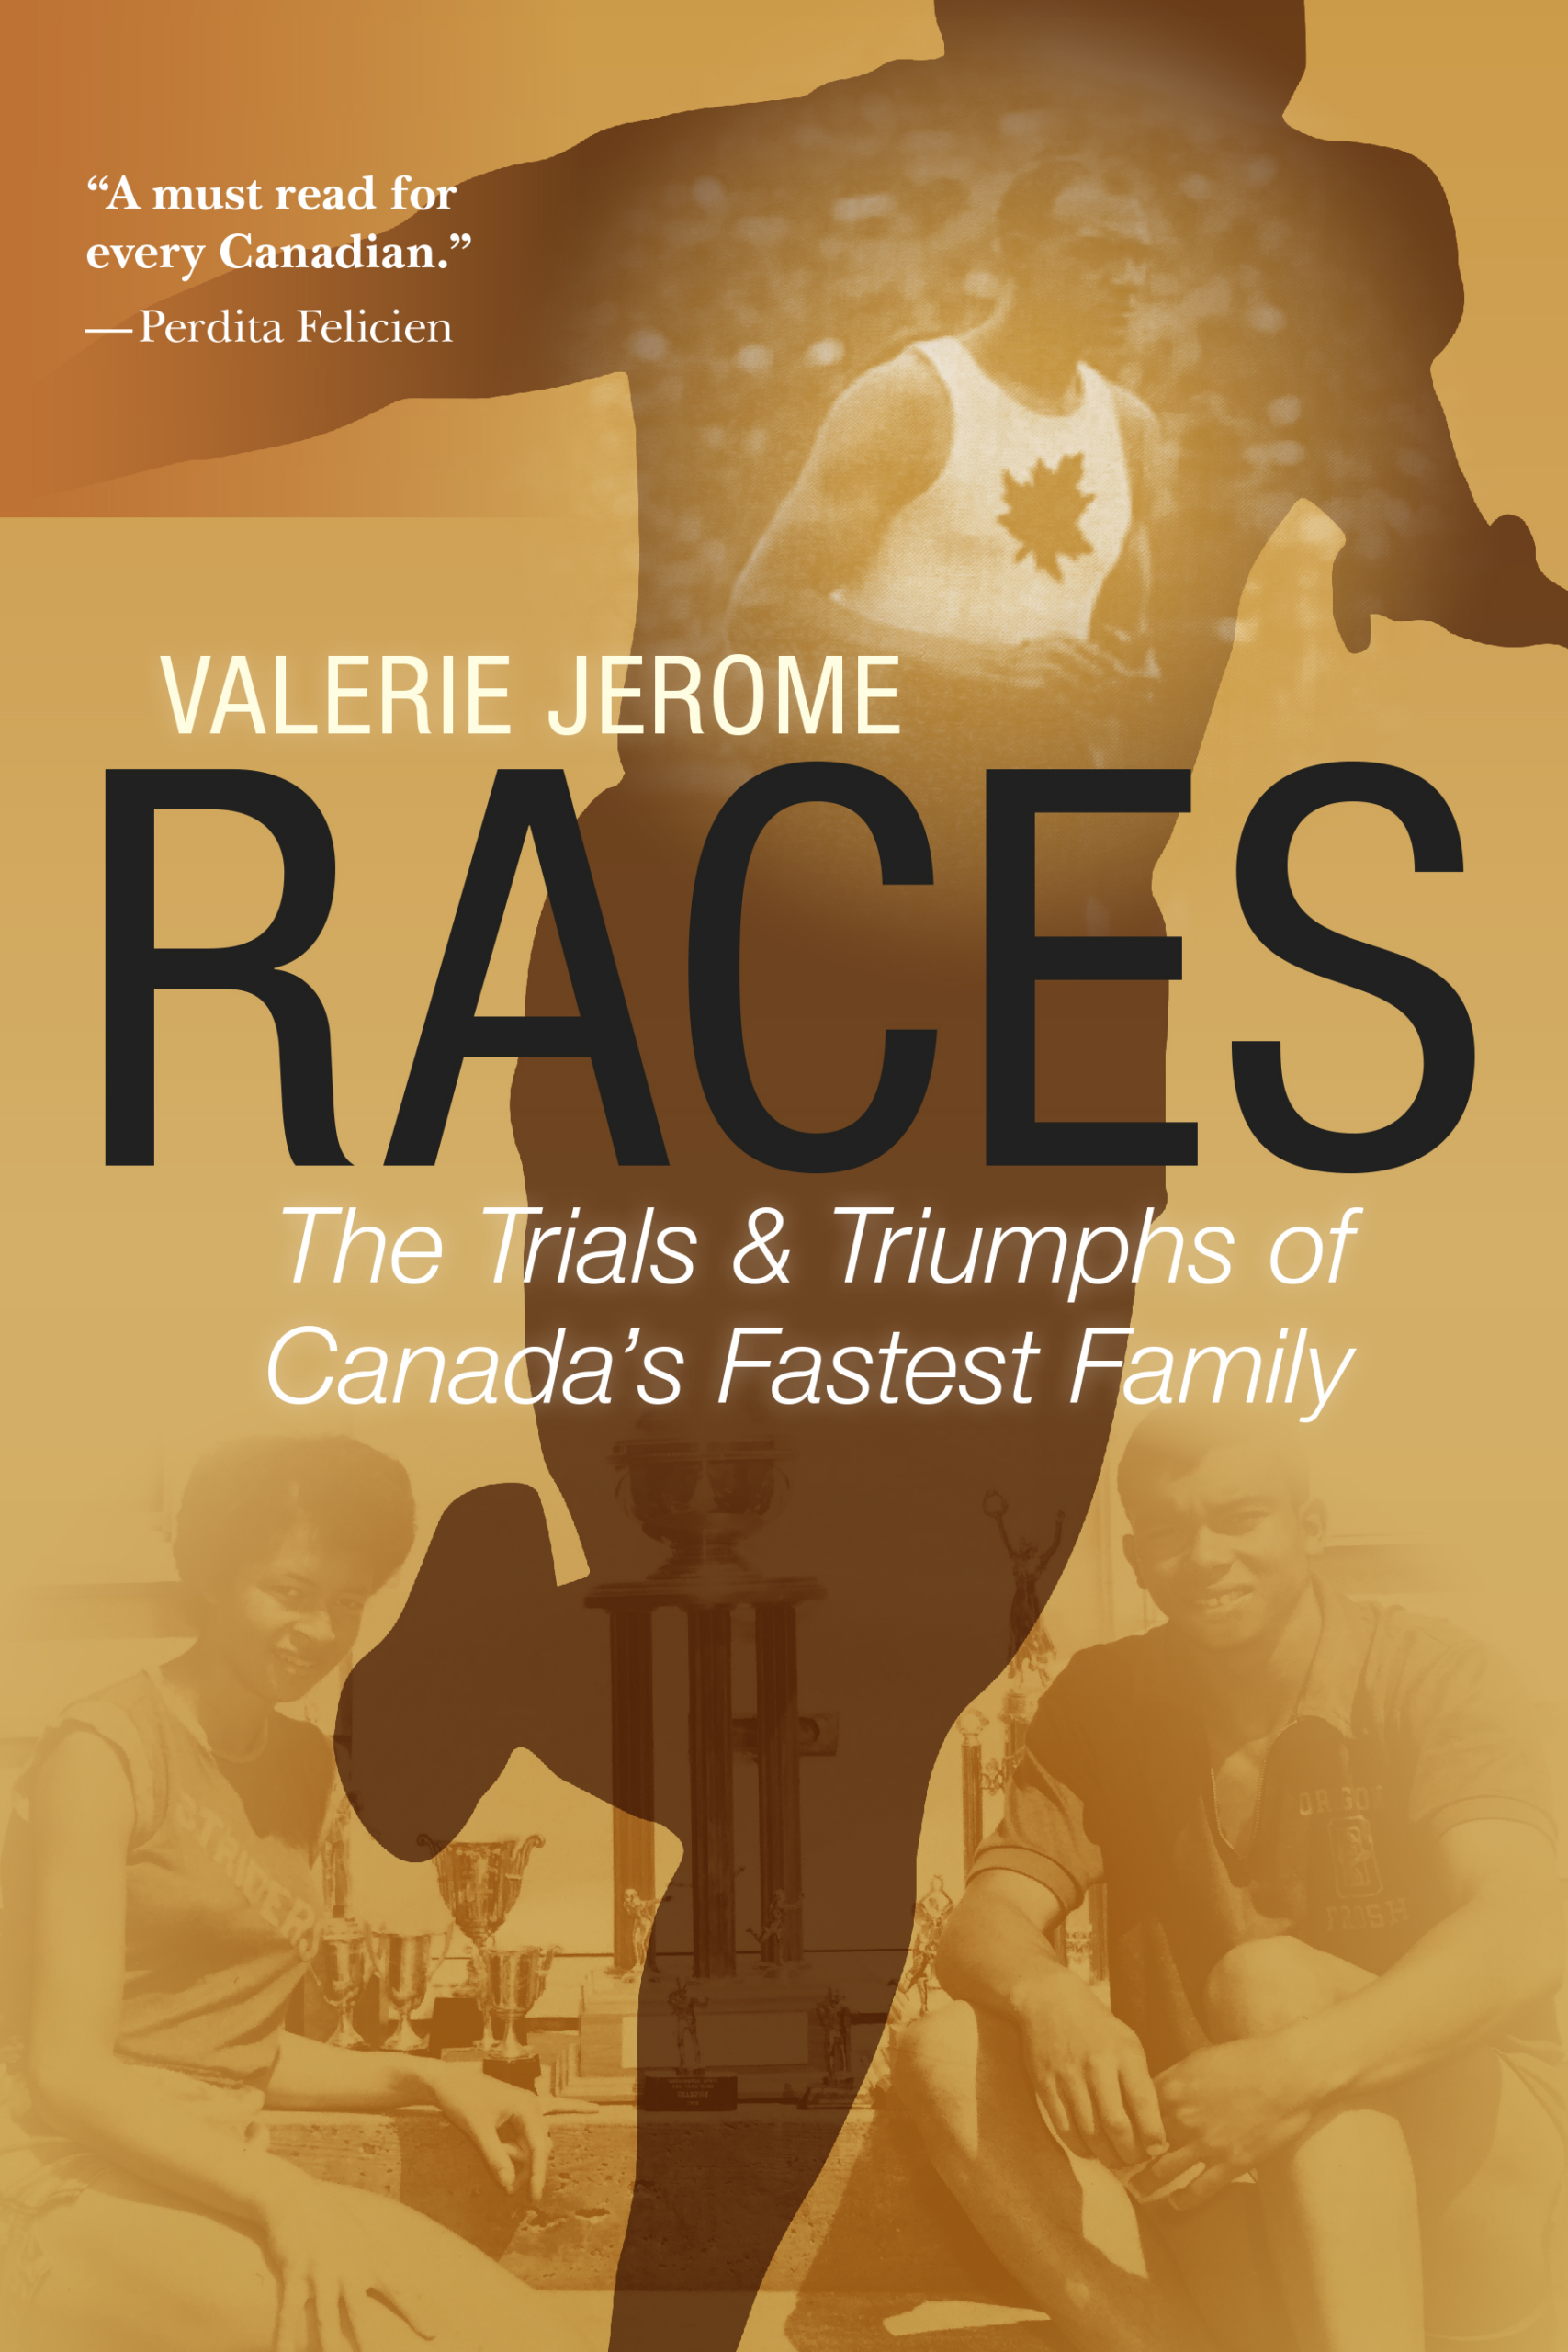 The cover of Races by Valerie Jerome.